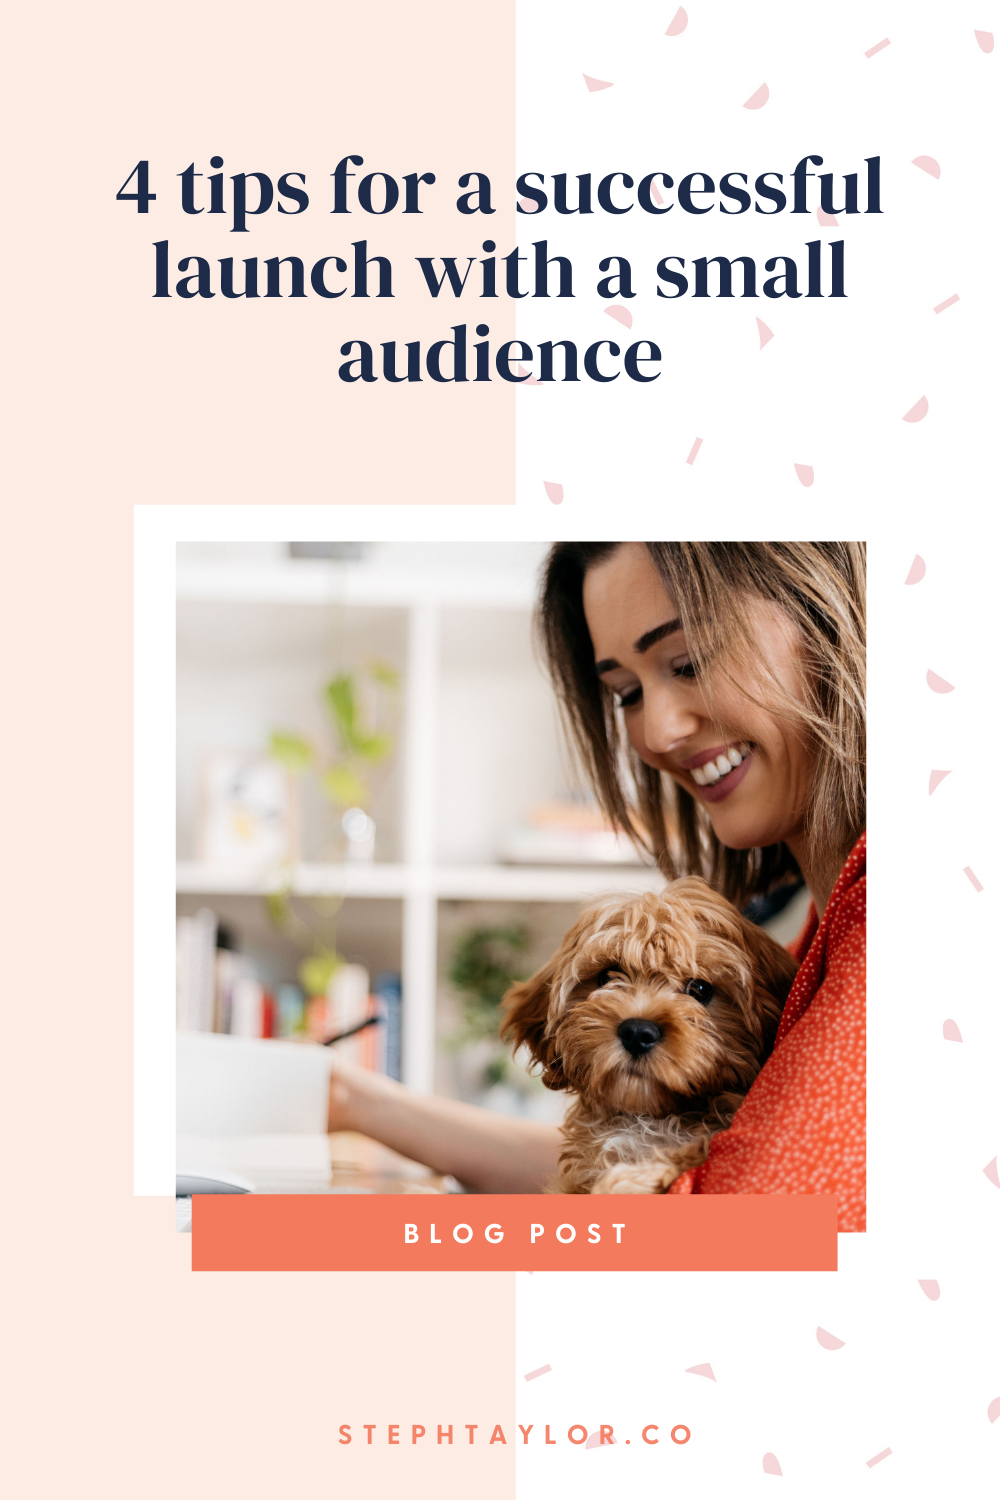 4 tips for launching successfully with a small audience